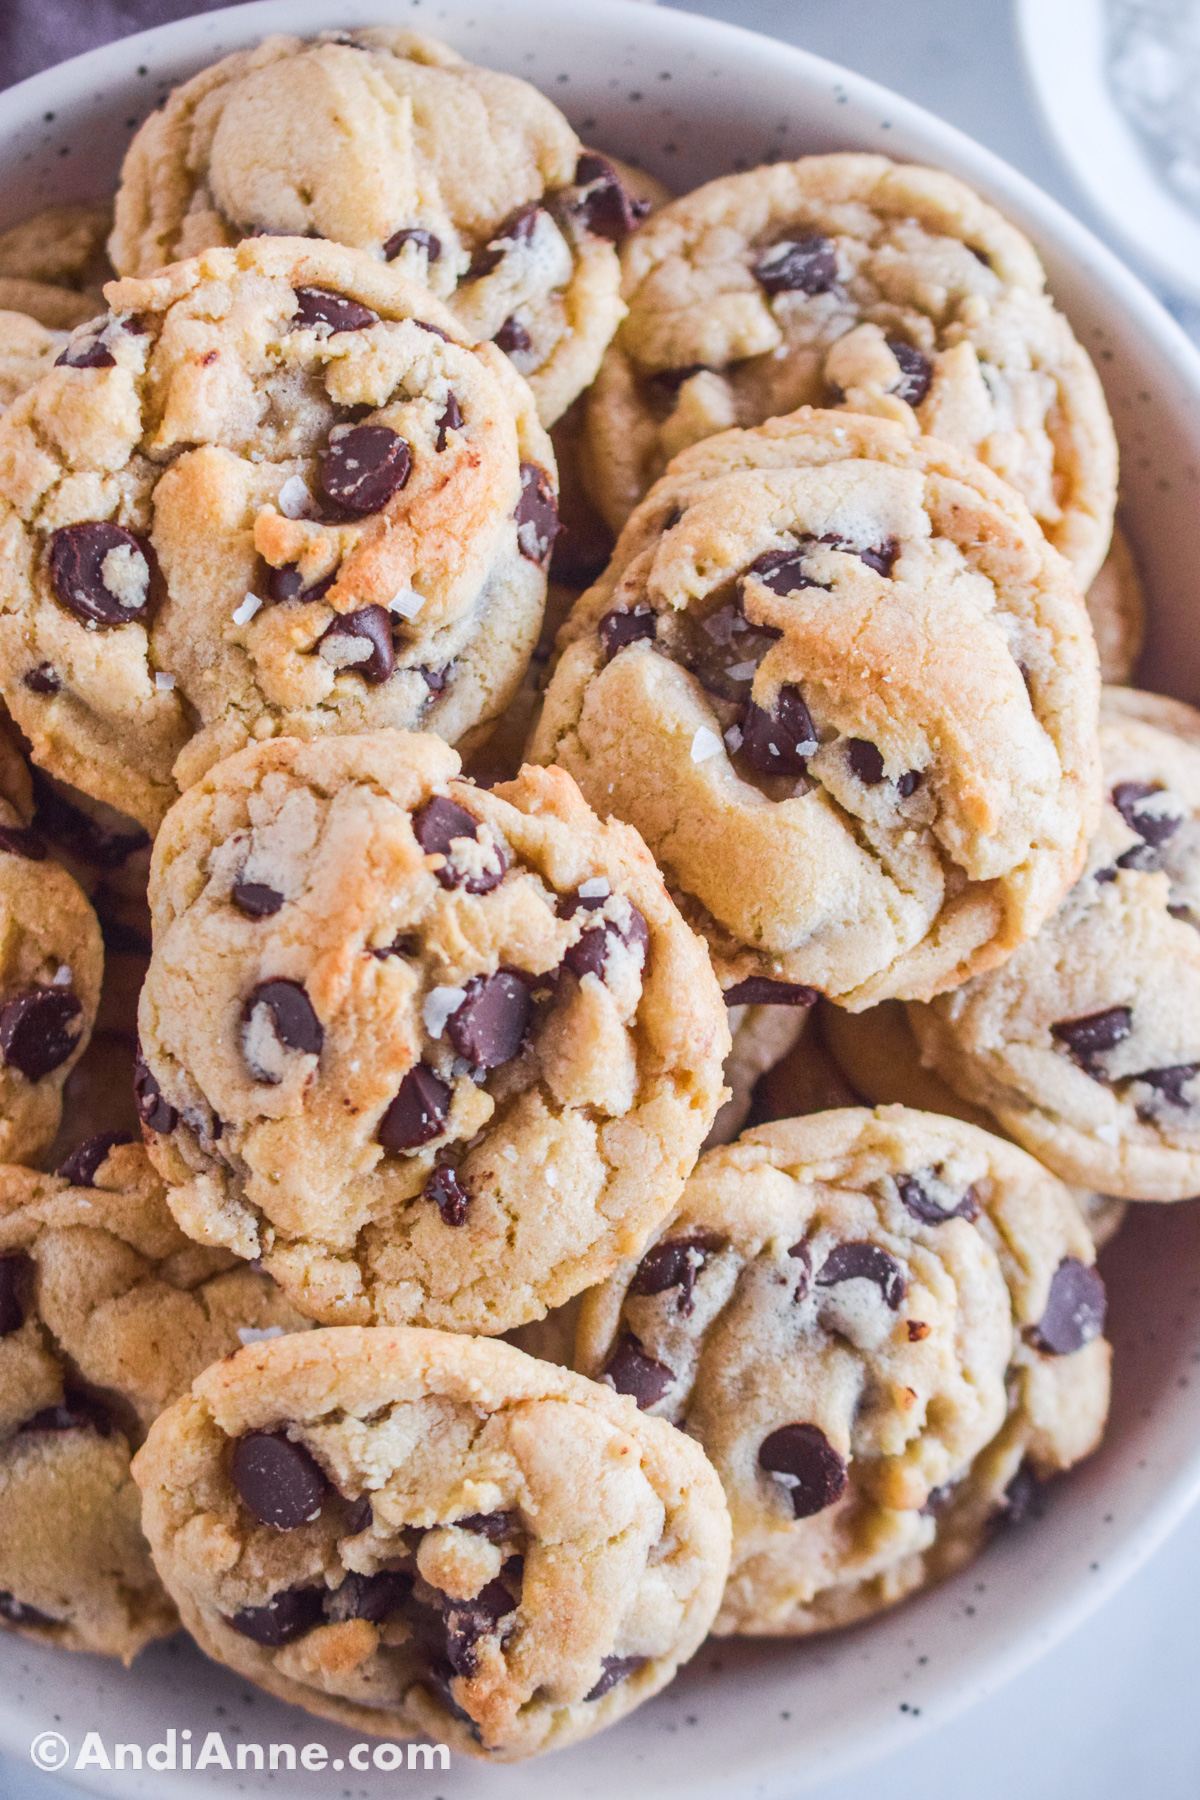 A bowl of chocolate chip cookies